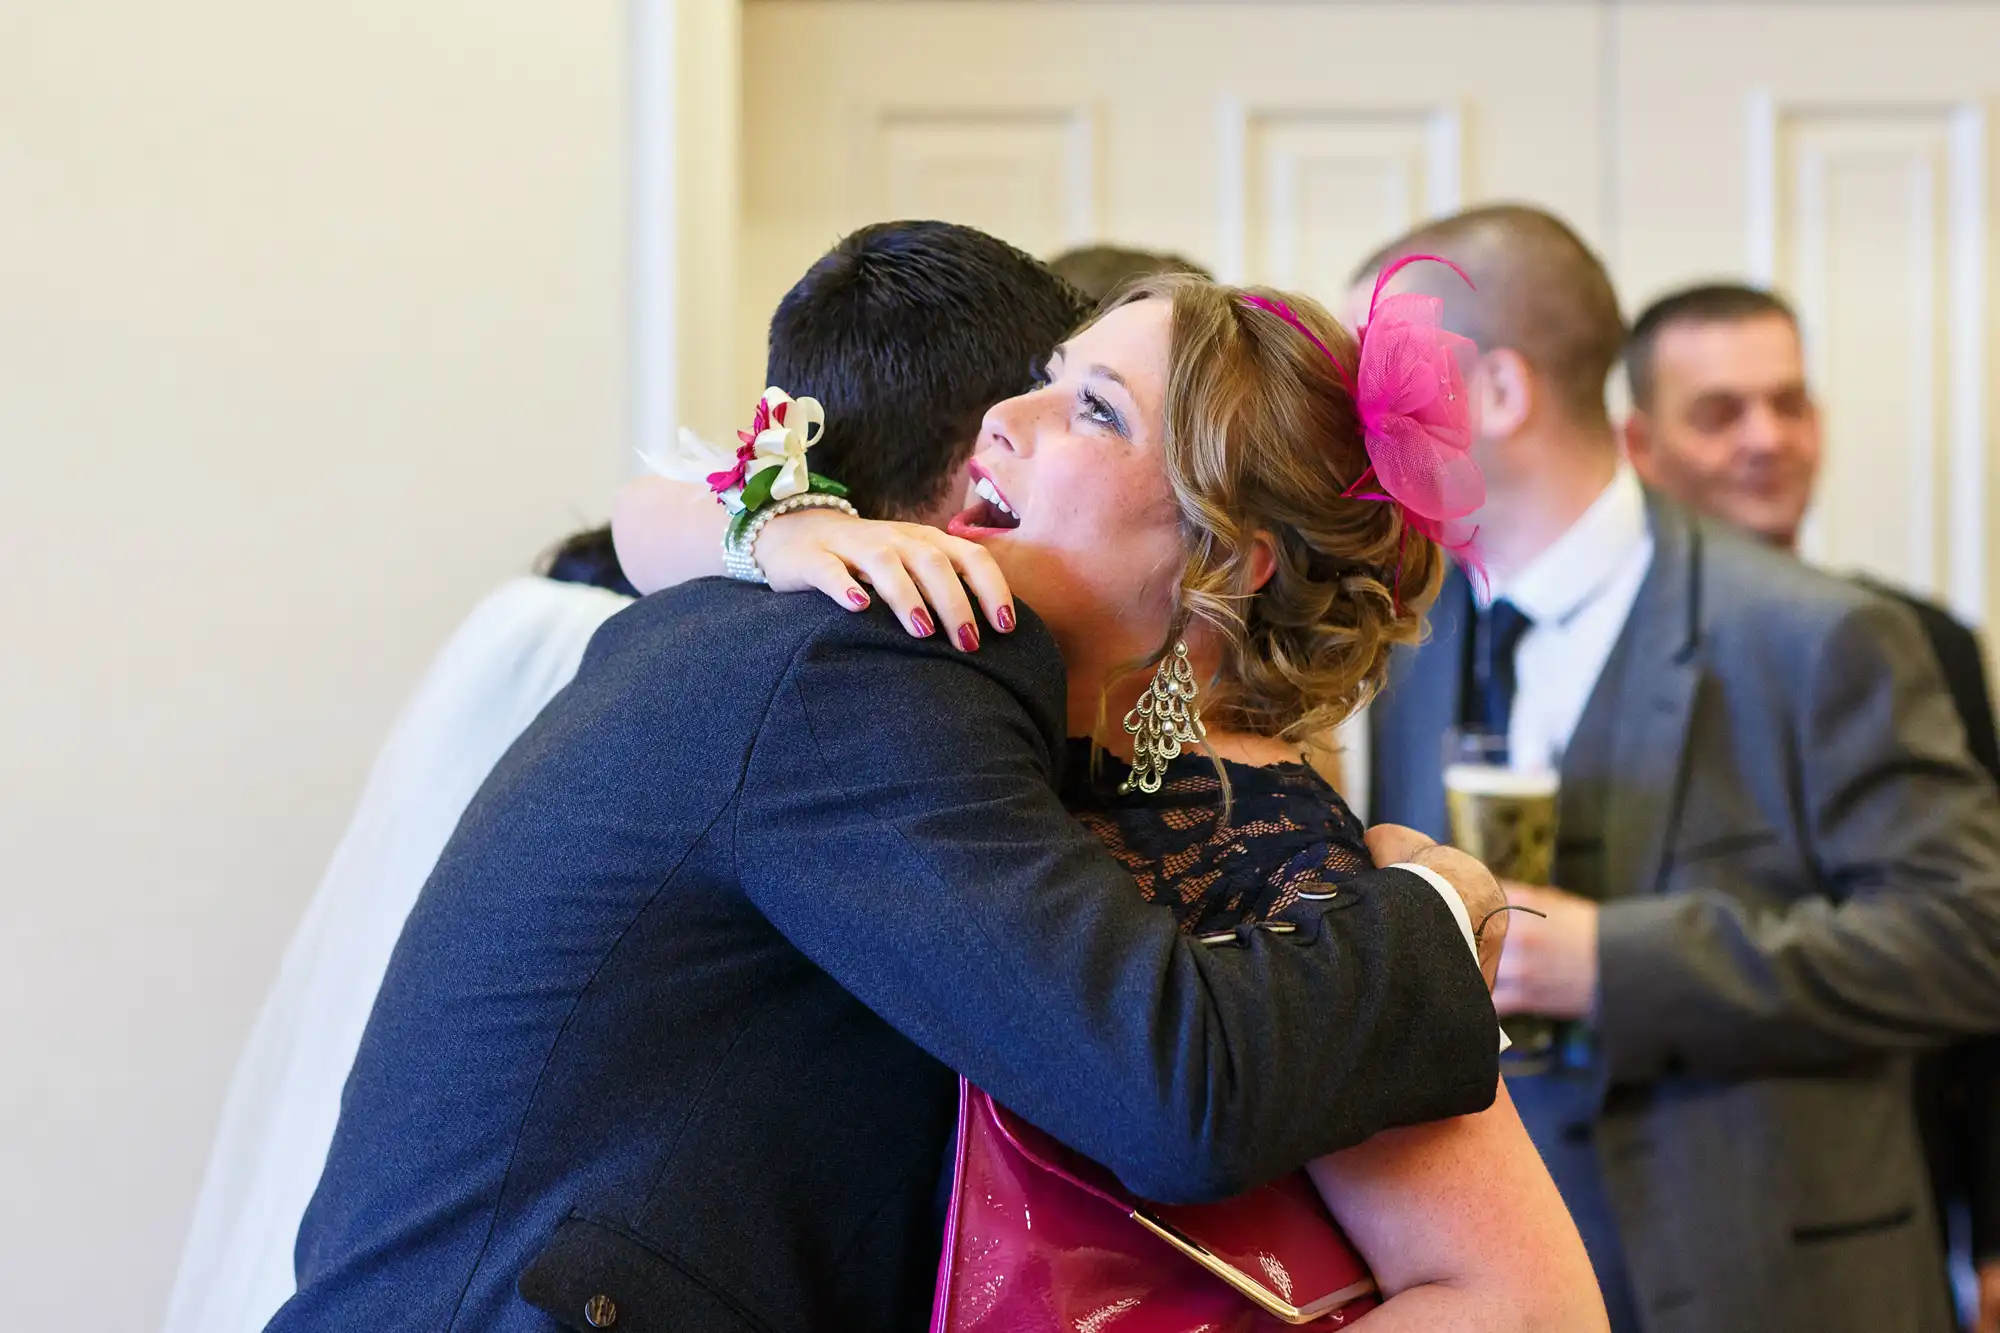 A woman in a pink dress and fascinator hugs a man in a dark suit at a social event, with another man smiling in the background.